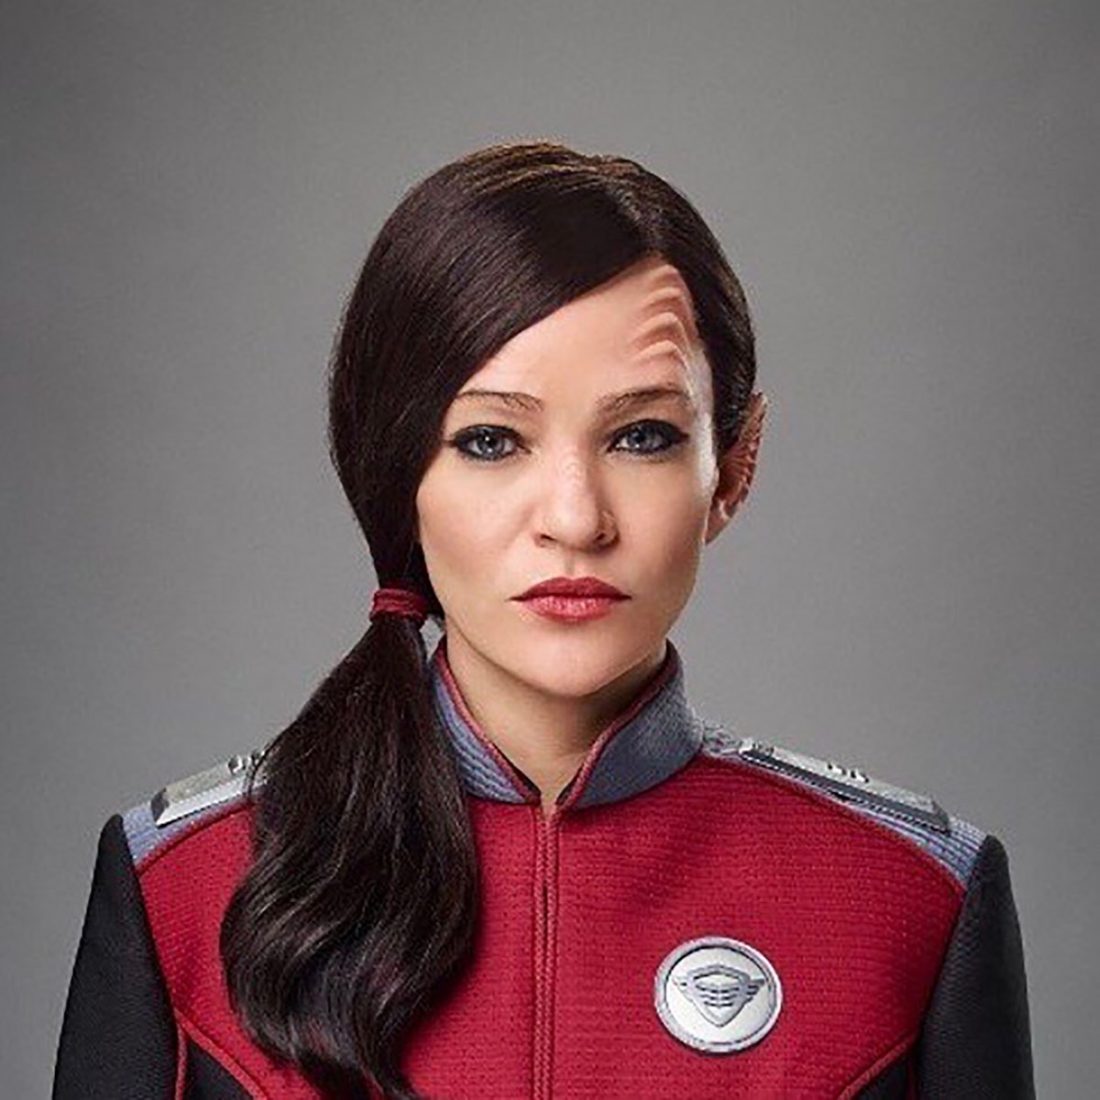 The distinctive and familiar forehead ridges of Talla Keyali on the Orville TV show from TVMaze.